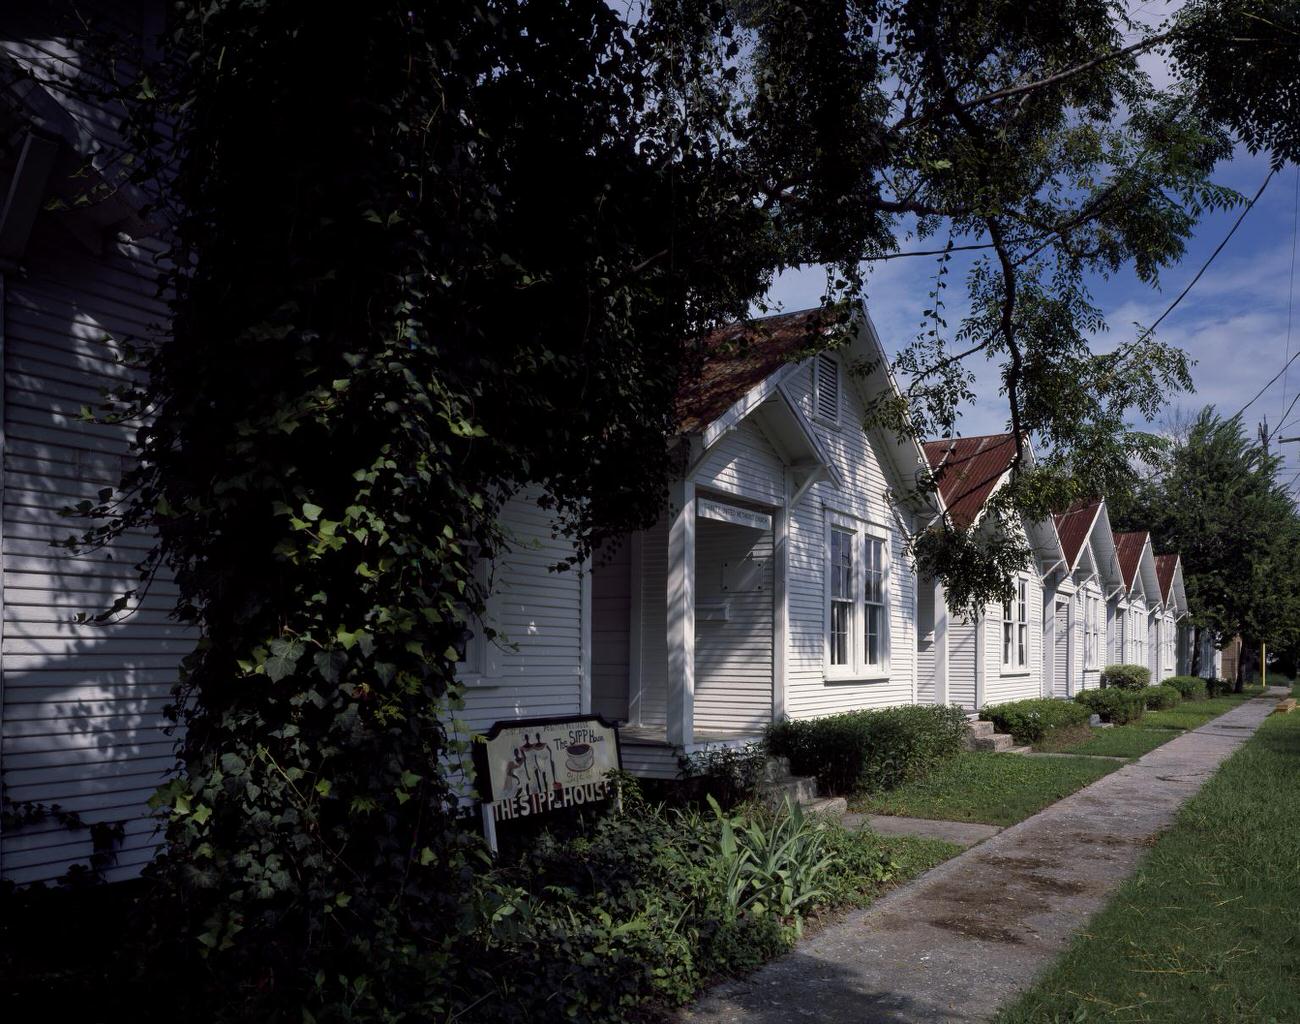 Shotgun houses in Project Row House, a public-art project in Houston, Texas, 1990s